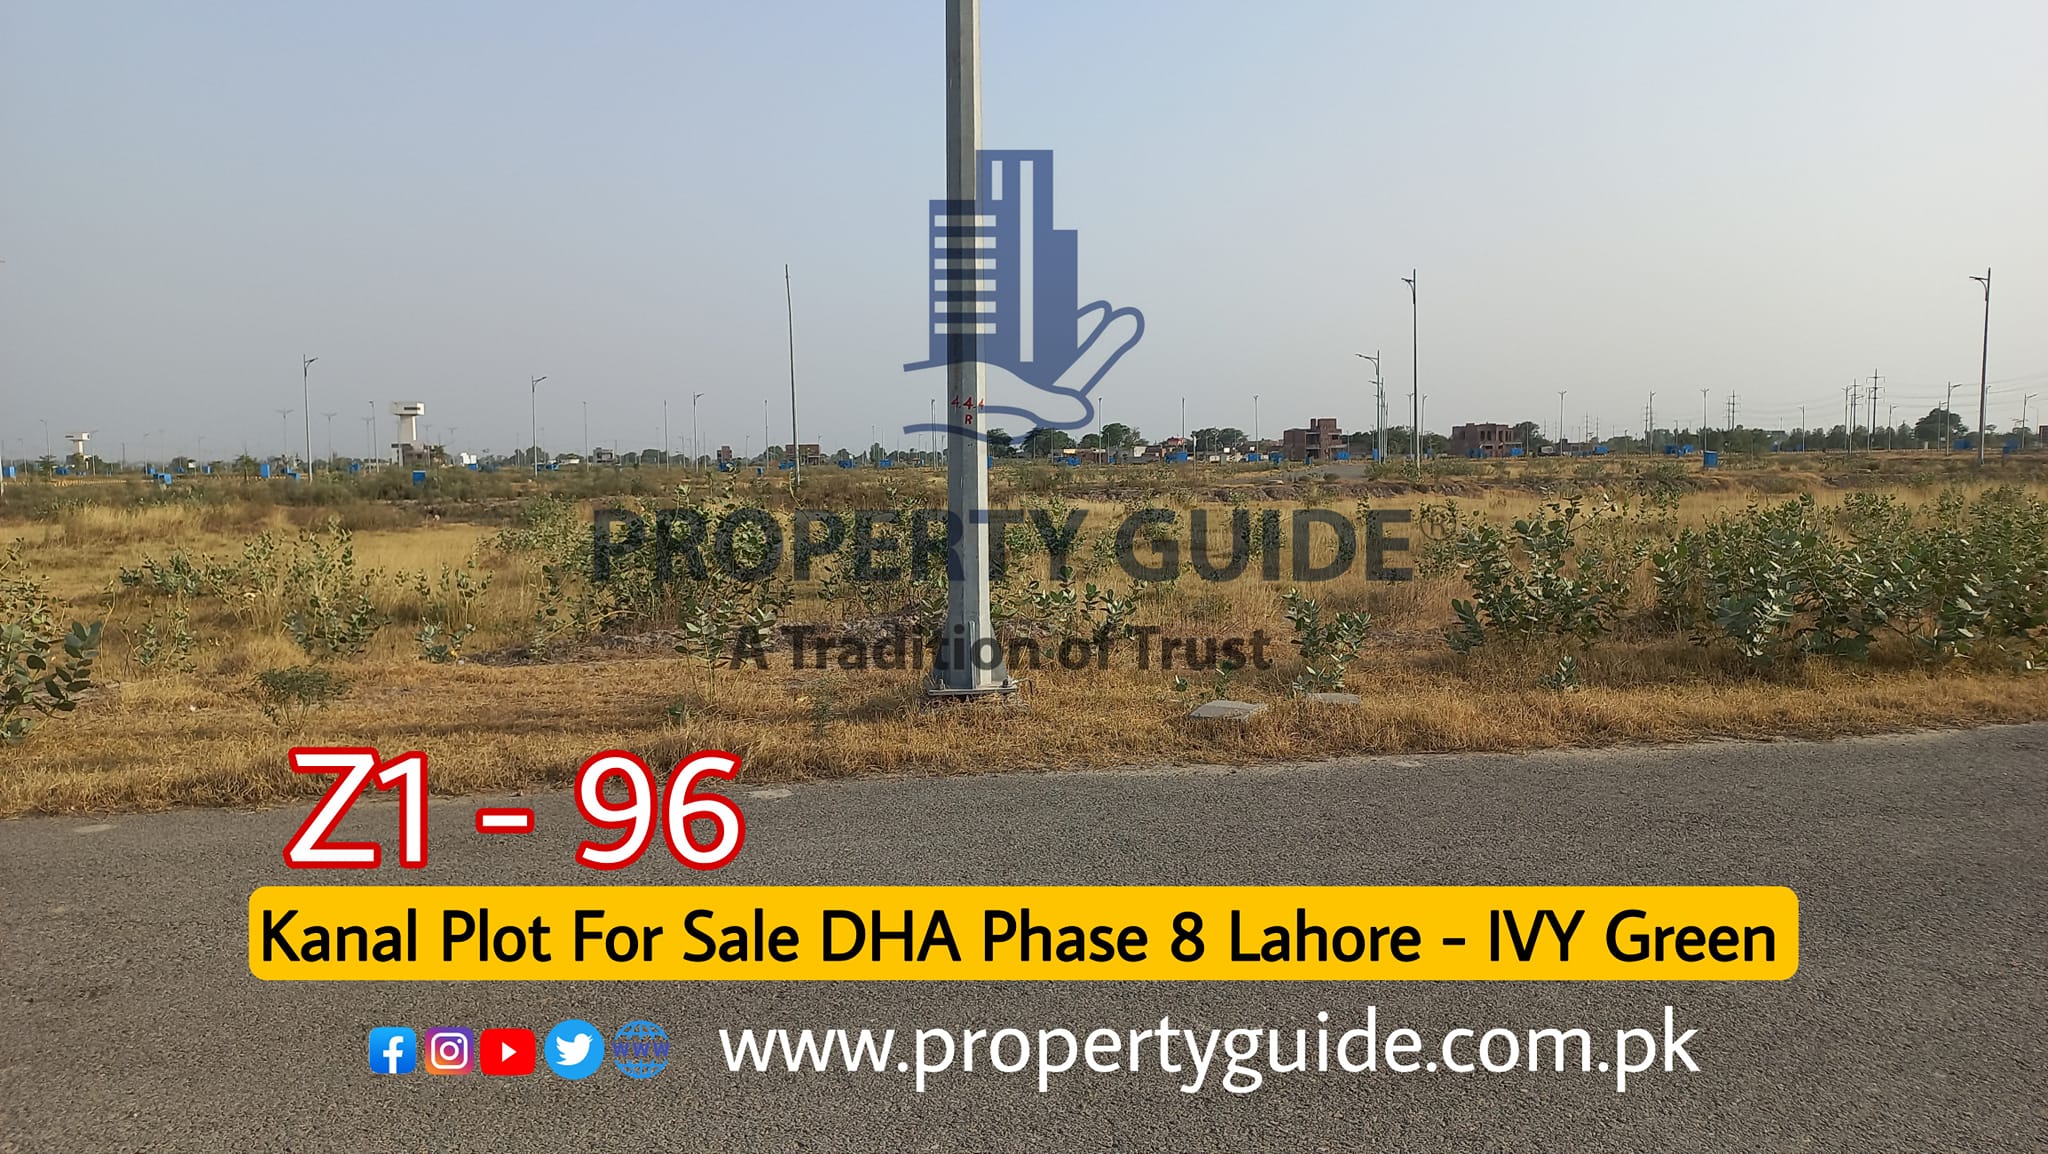 DHA Phase 8 Ivy Green Lahore Kanal Plot For Sale Z1 – 96